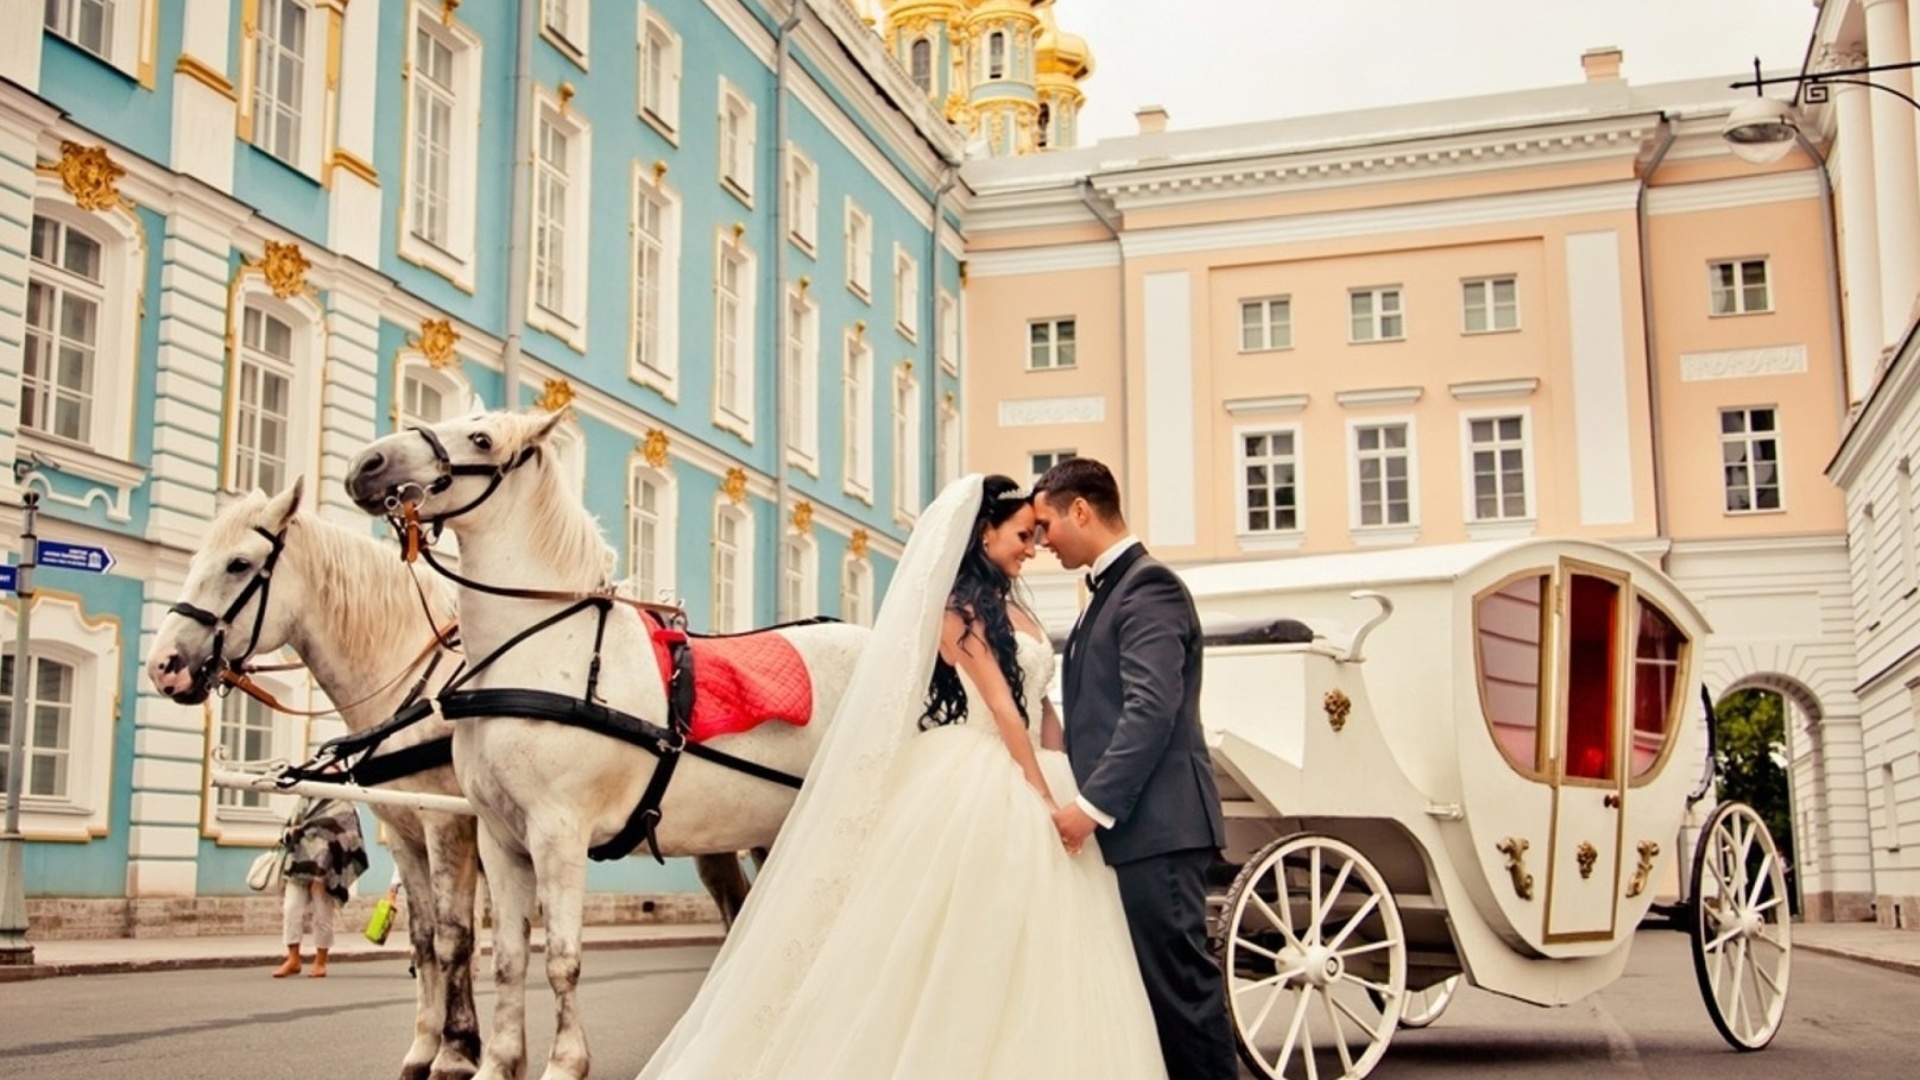 Wedding in carriage wallpaper 1920x1080